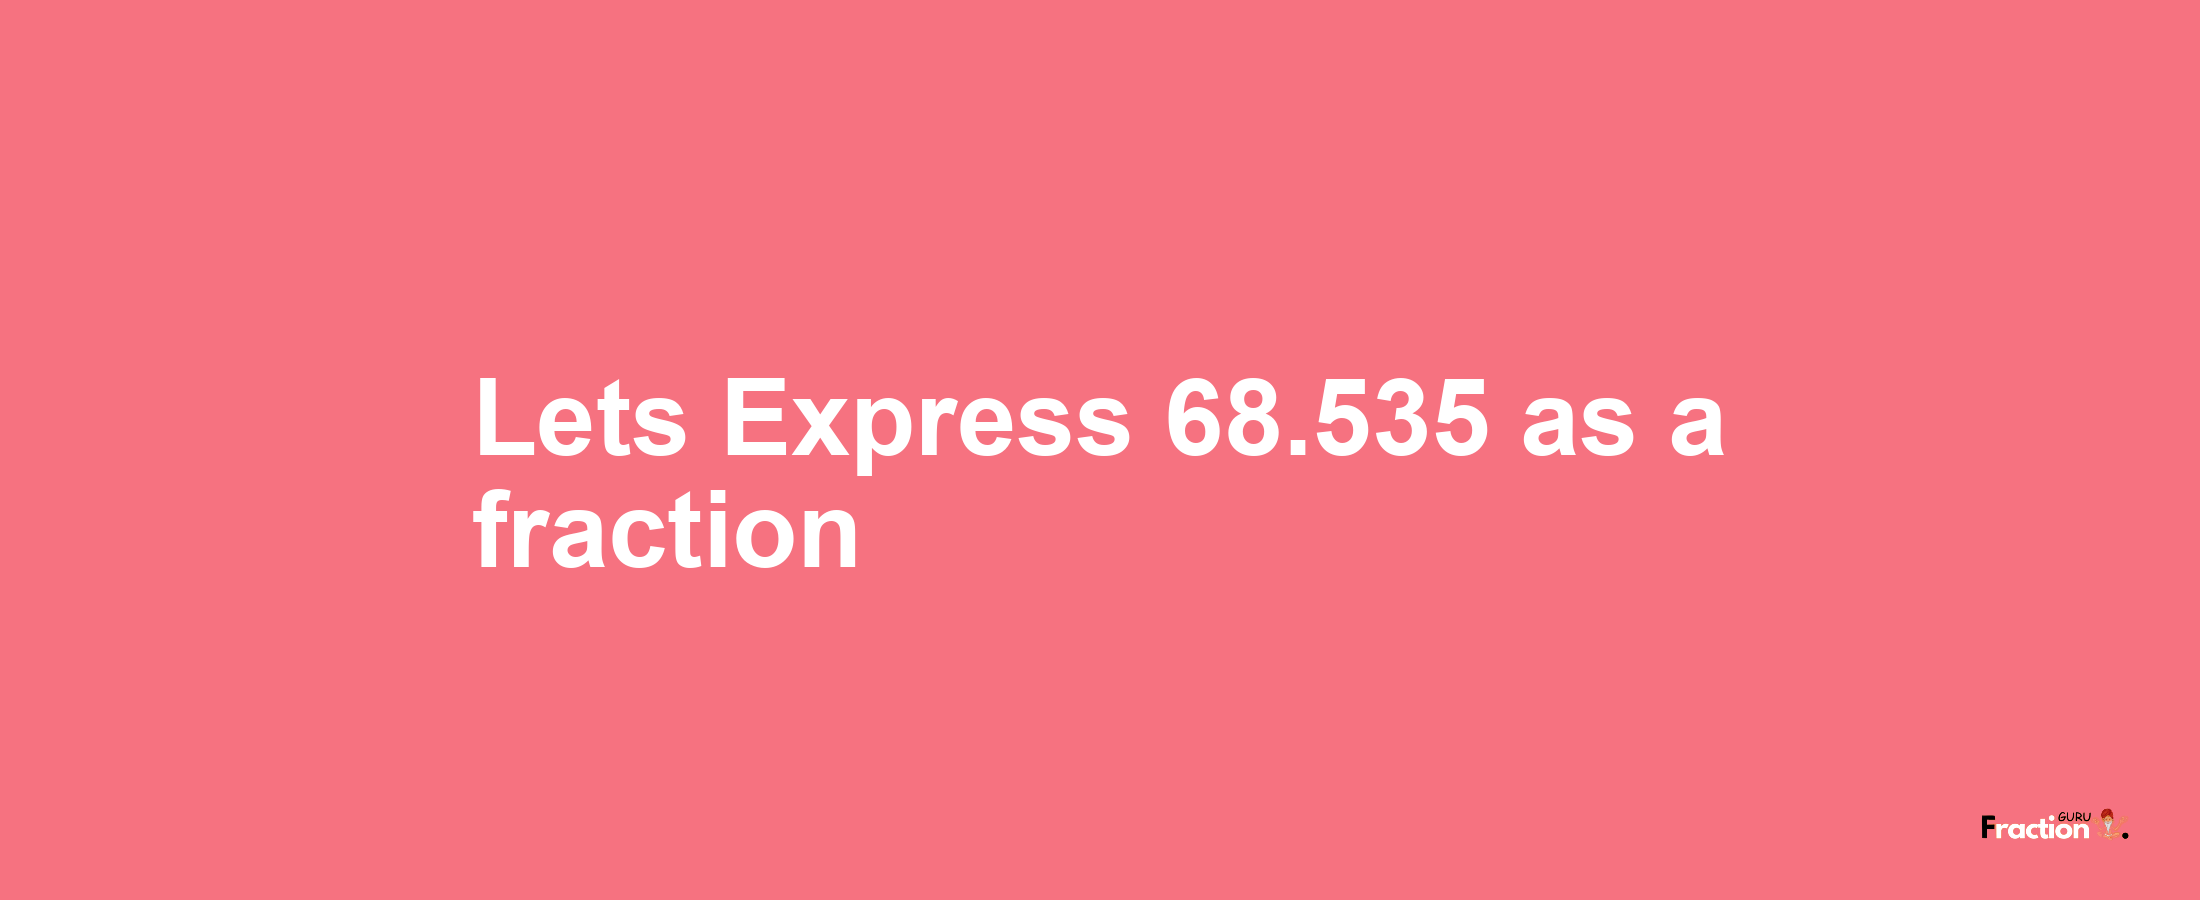 Lets Express 68.535 as afraction